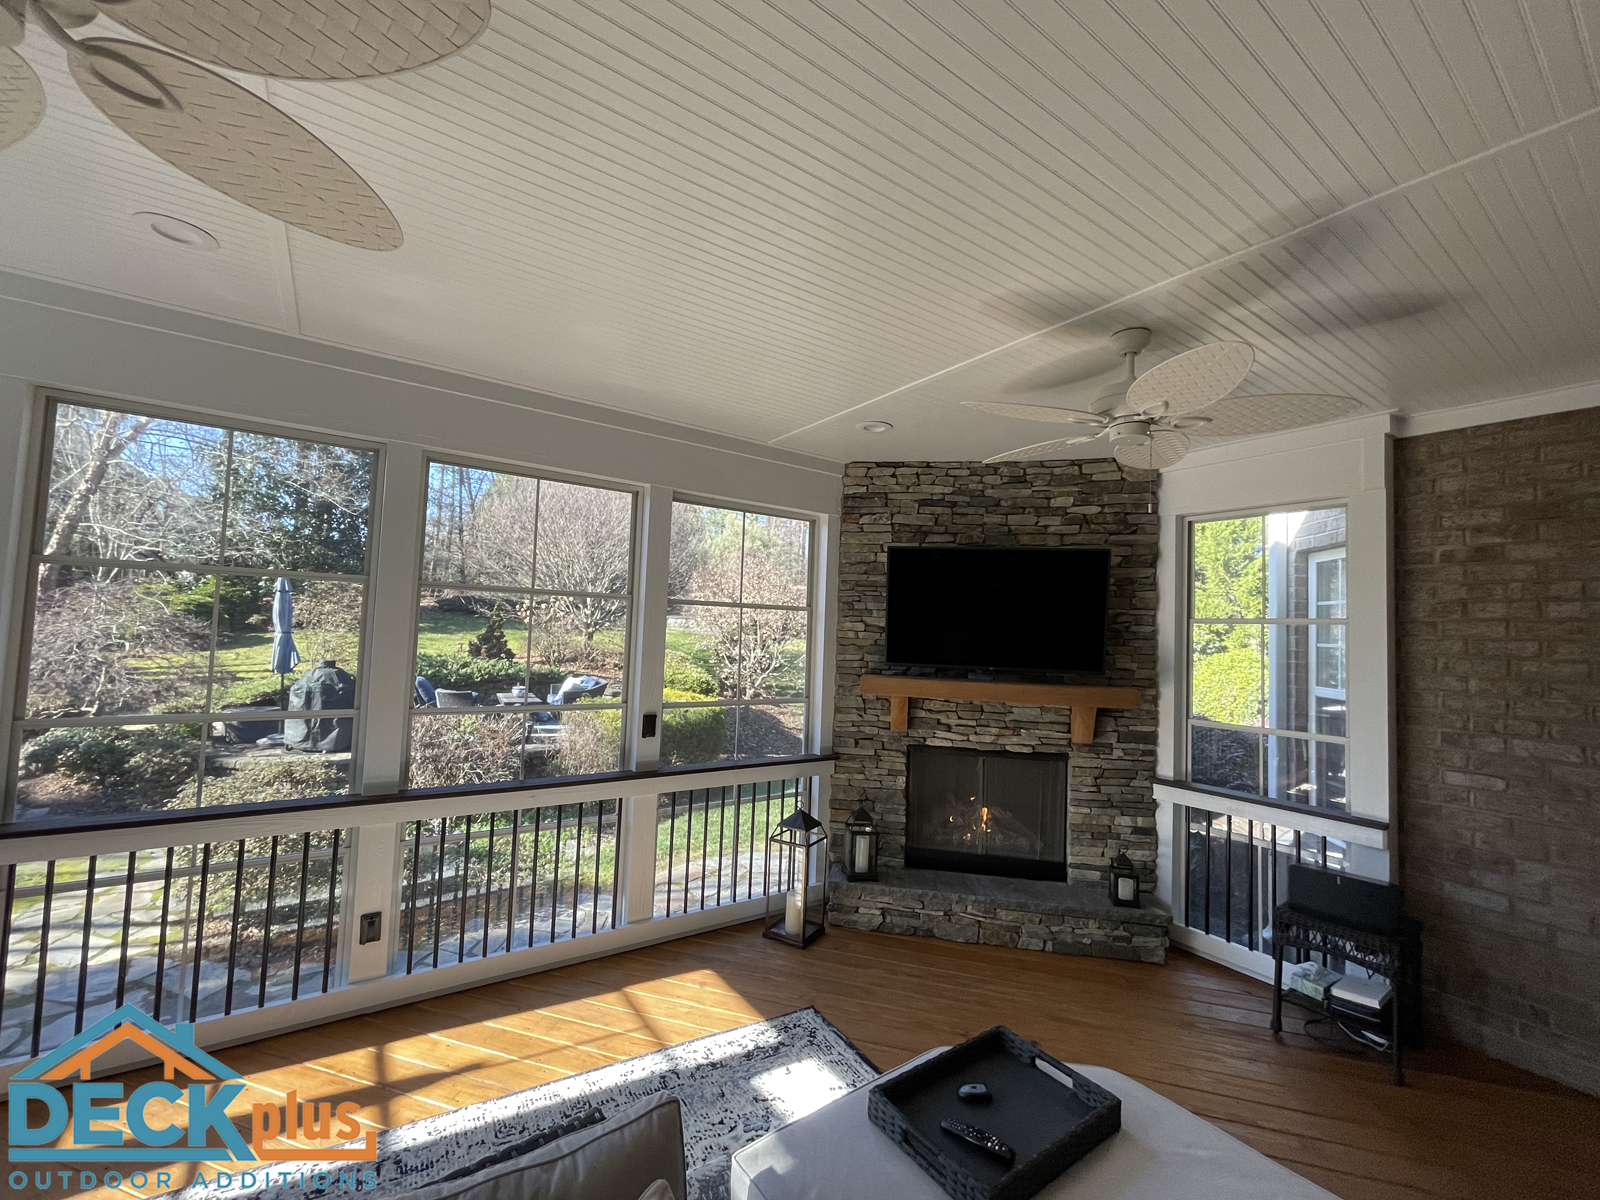 Screened-in-porch with Trex composite floors and EzeVue windows. Fireplace in corner with stone surround. Two white ceiling fans. View of trees outside.